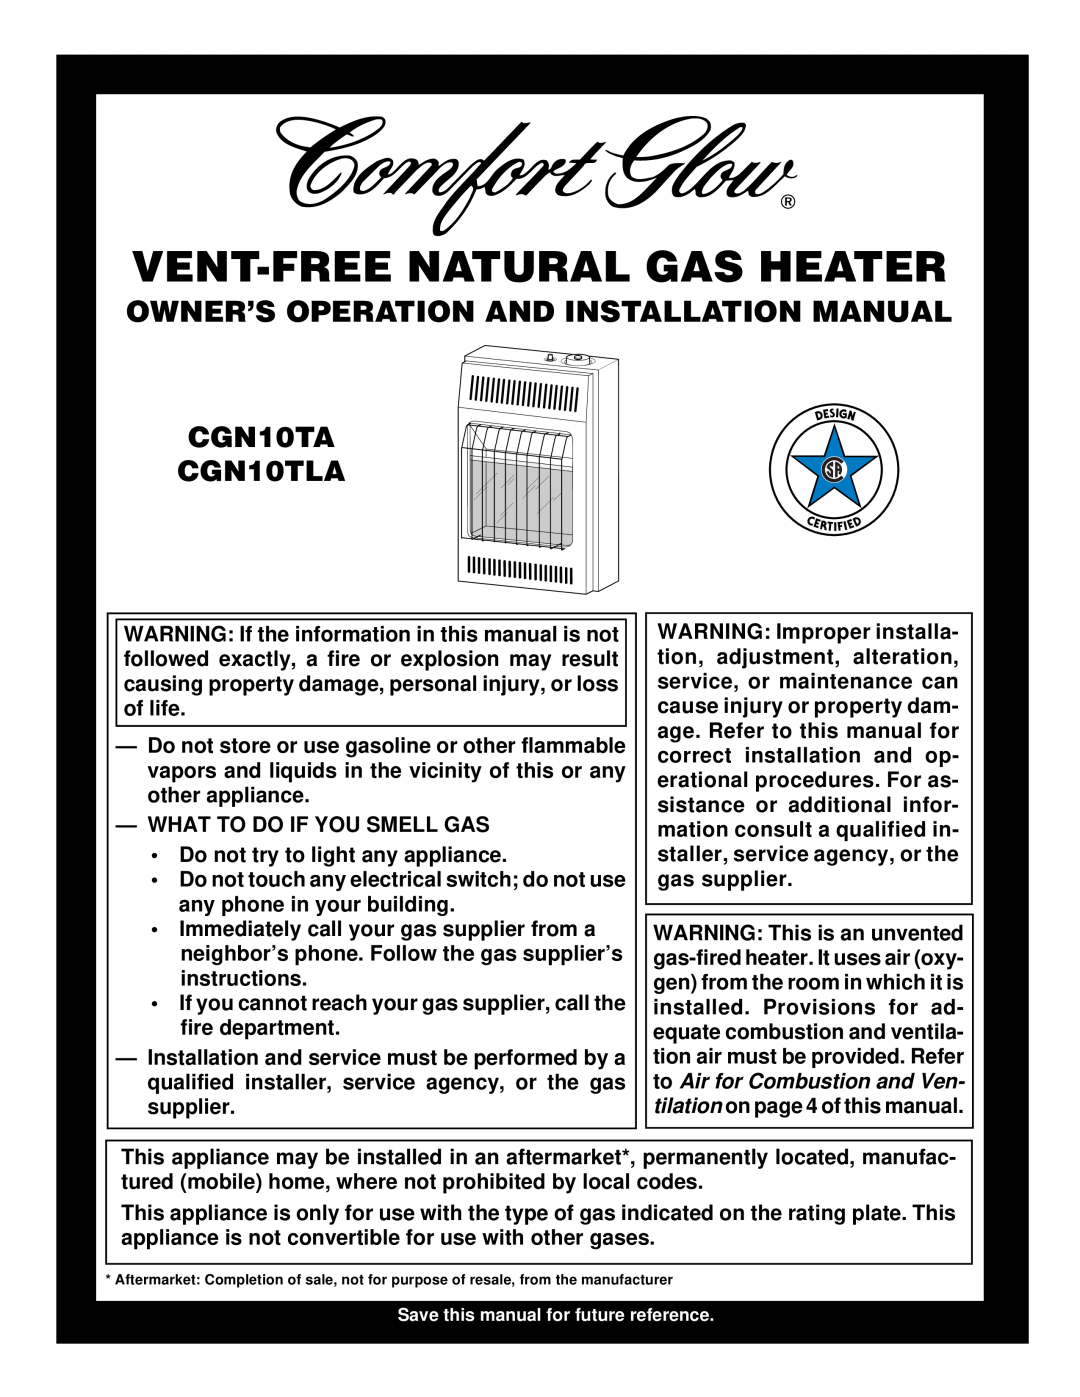 Desa installation manual CGN10TA CGN10TLA, What To Do If You Smell Gas, Do not try to light any appliance 